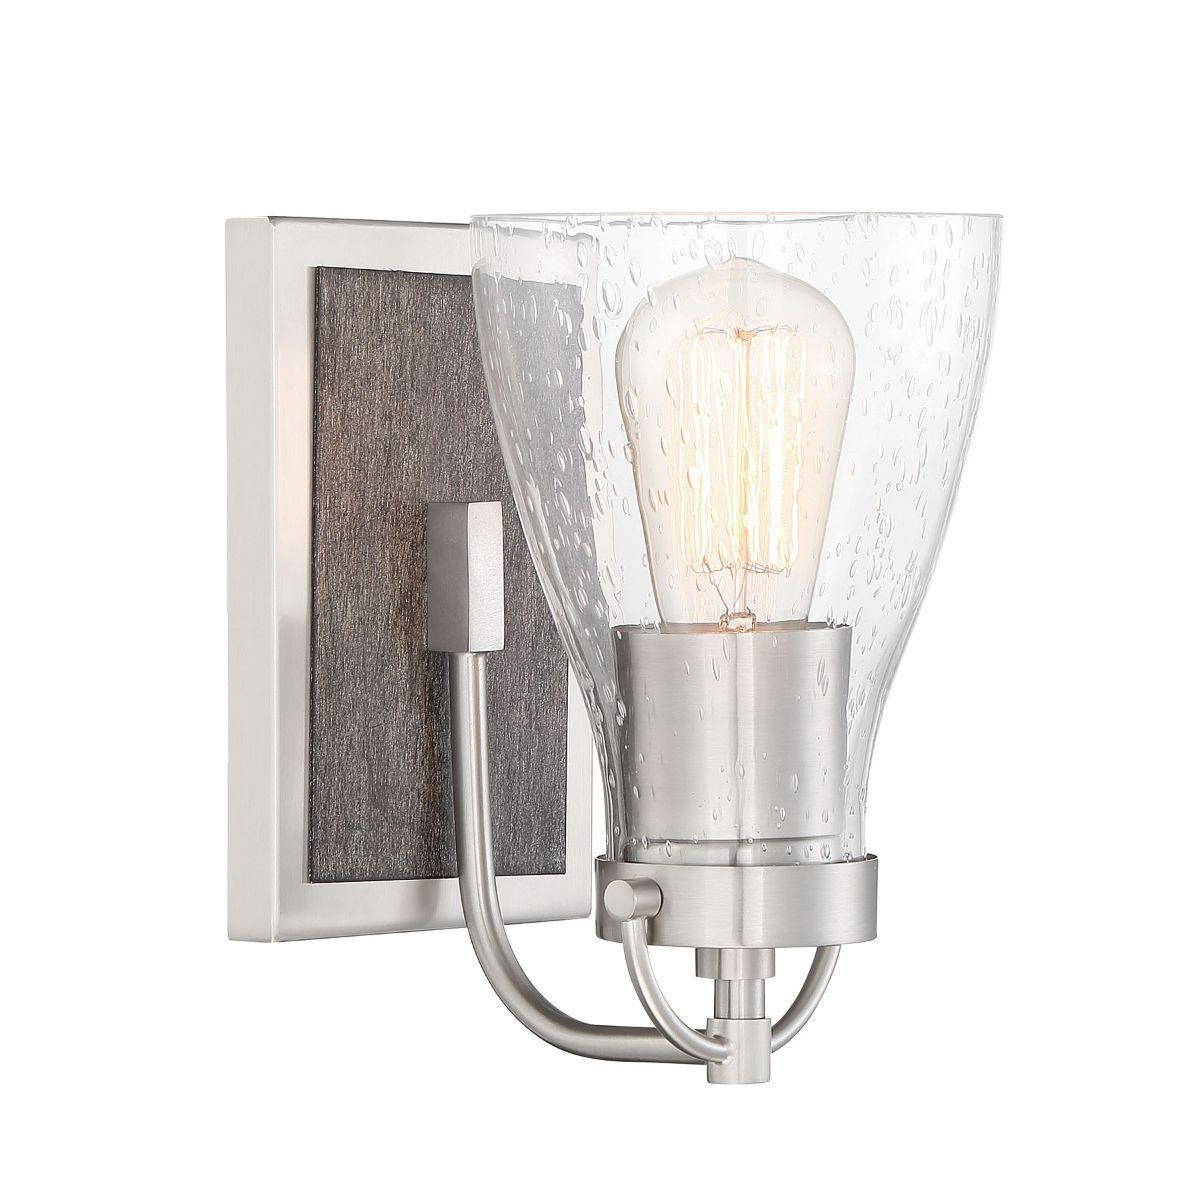 Garrison 9 in. Wall Sconce Brushed Nickel finish